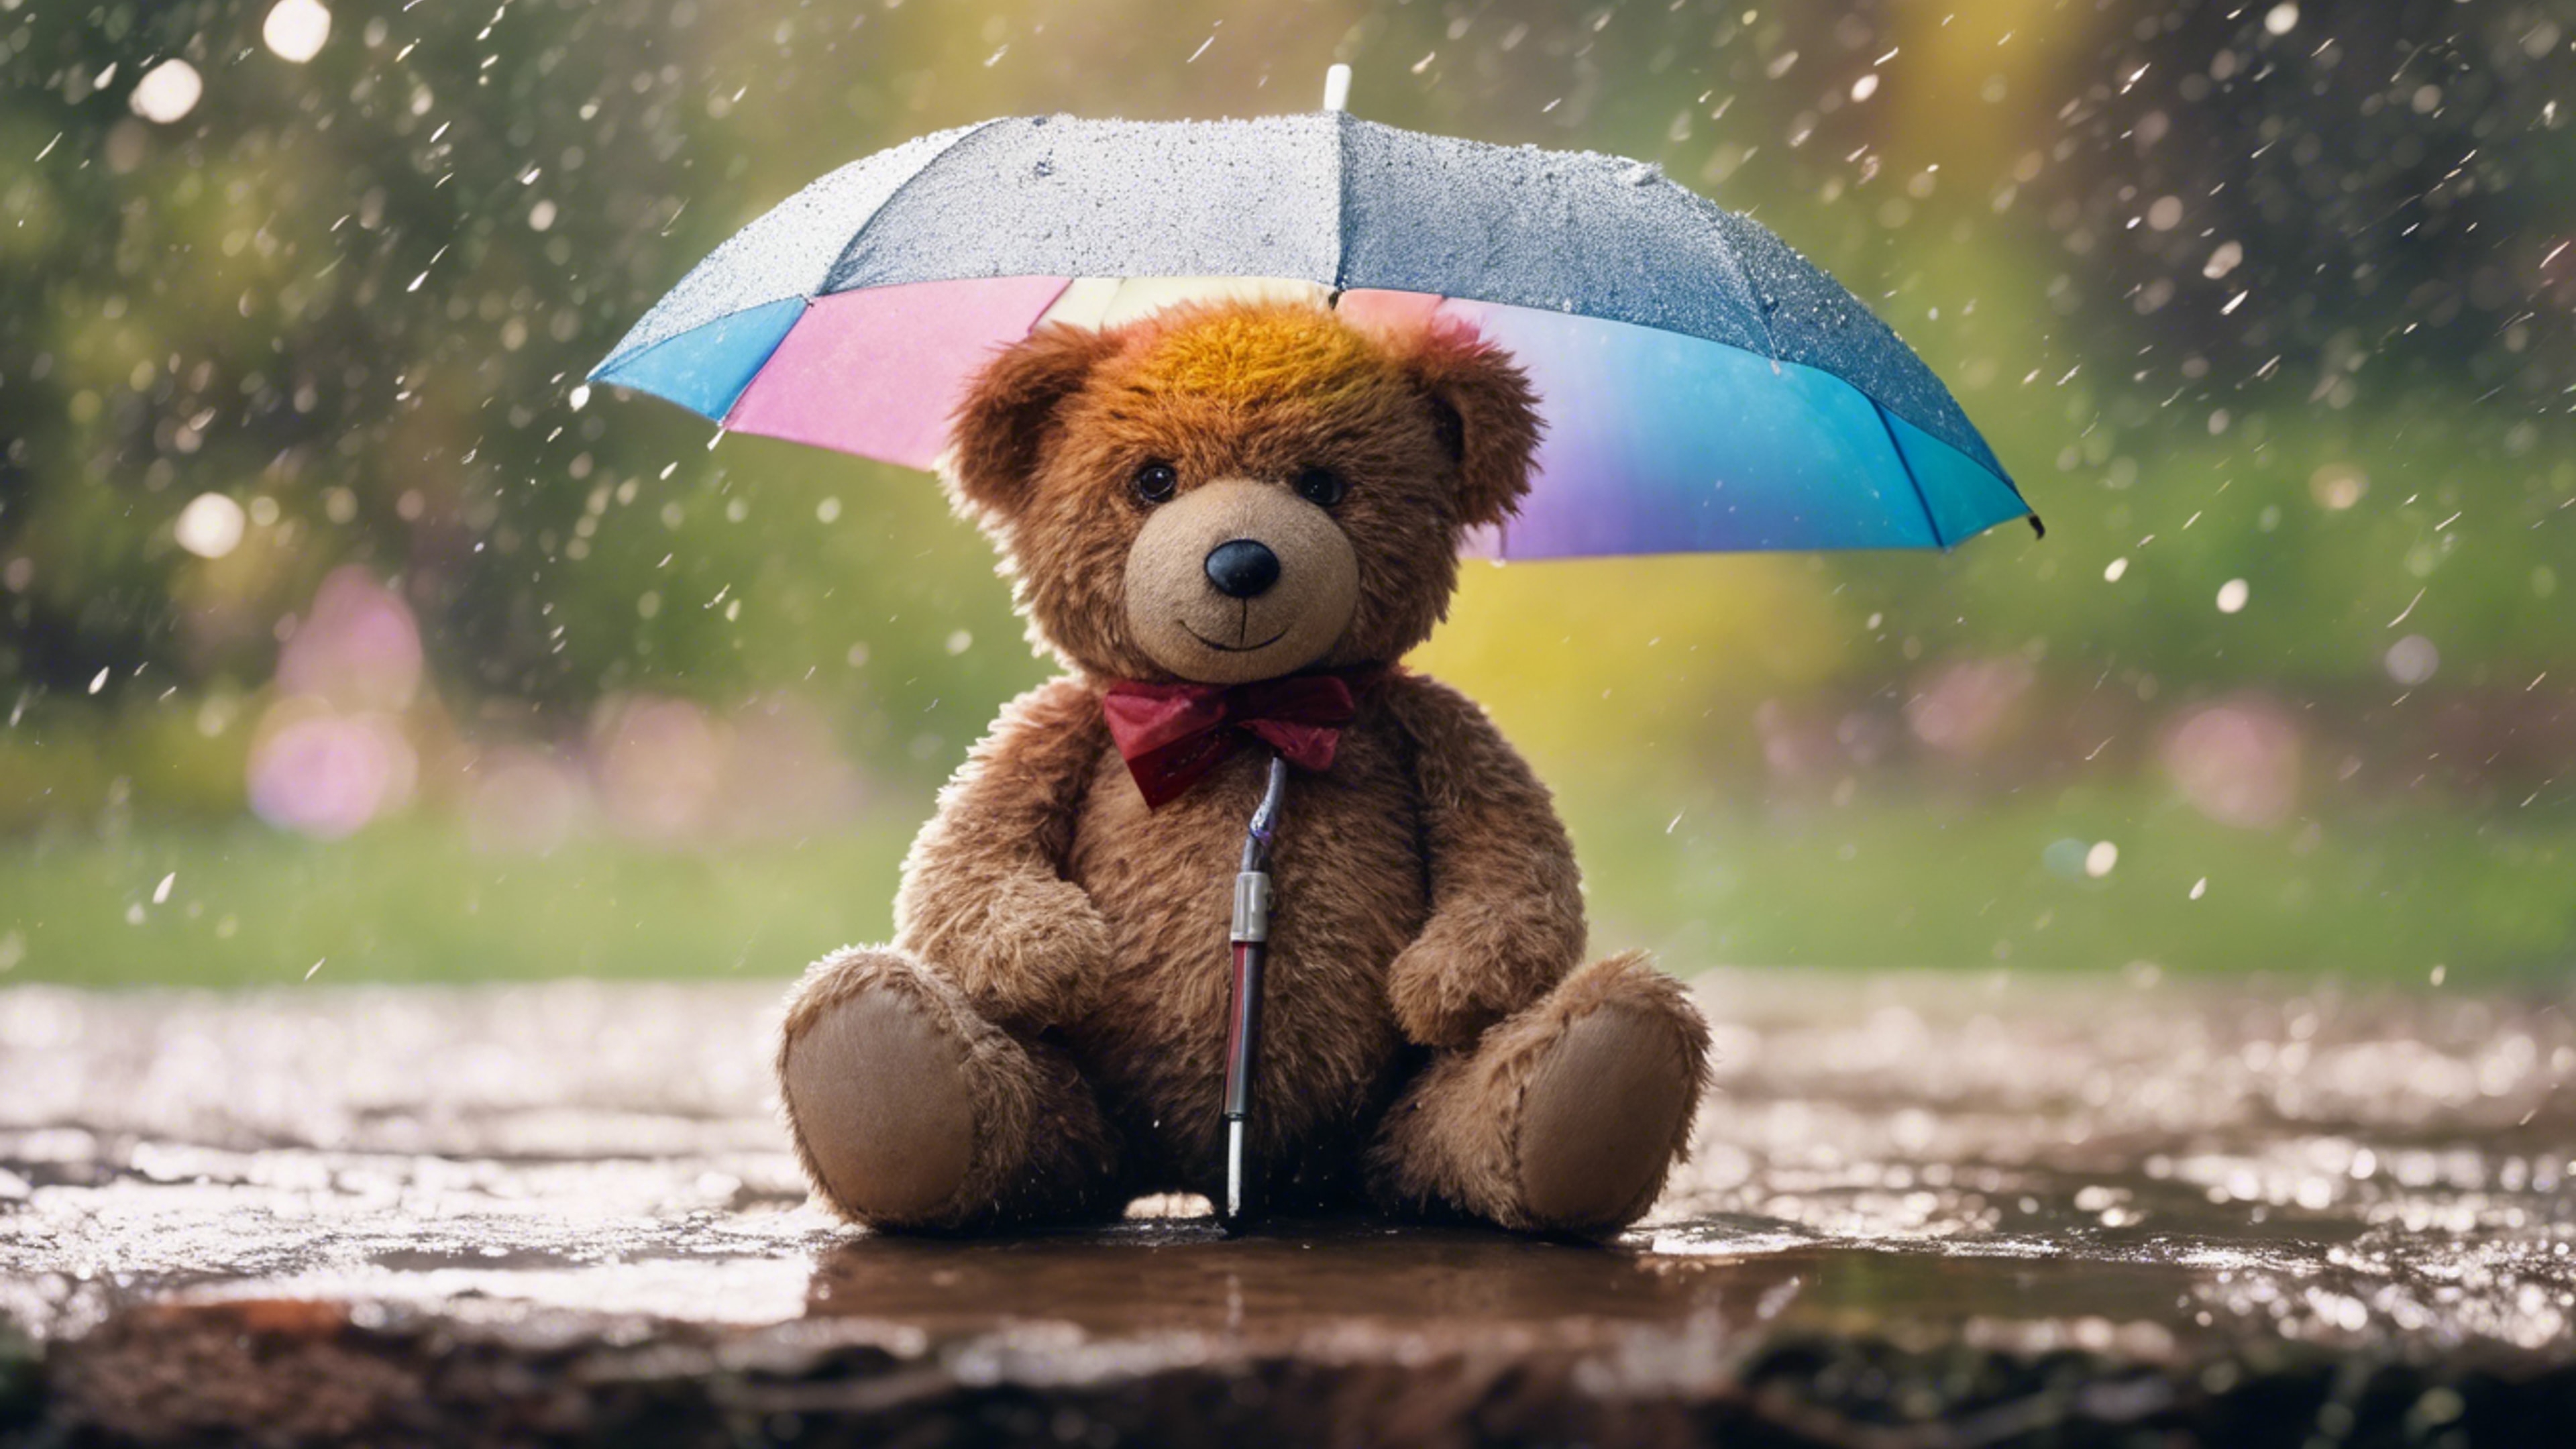 A teddy bear sitting with a tiny umbrella under a spring shower with a rainbow in the distance. Wallpaper[d58e092a25754cd9bfad]